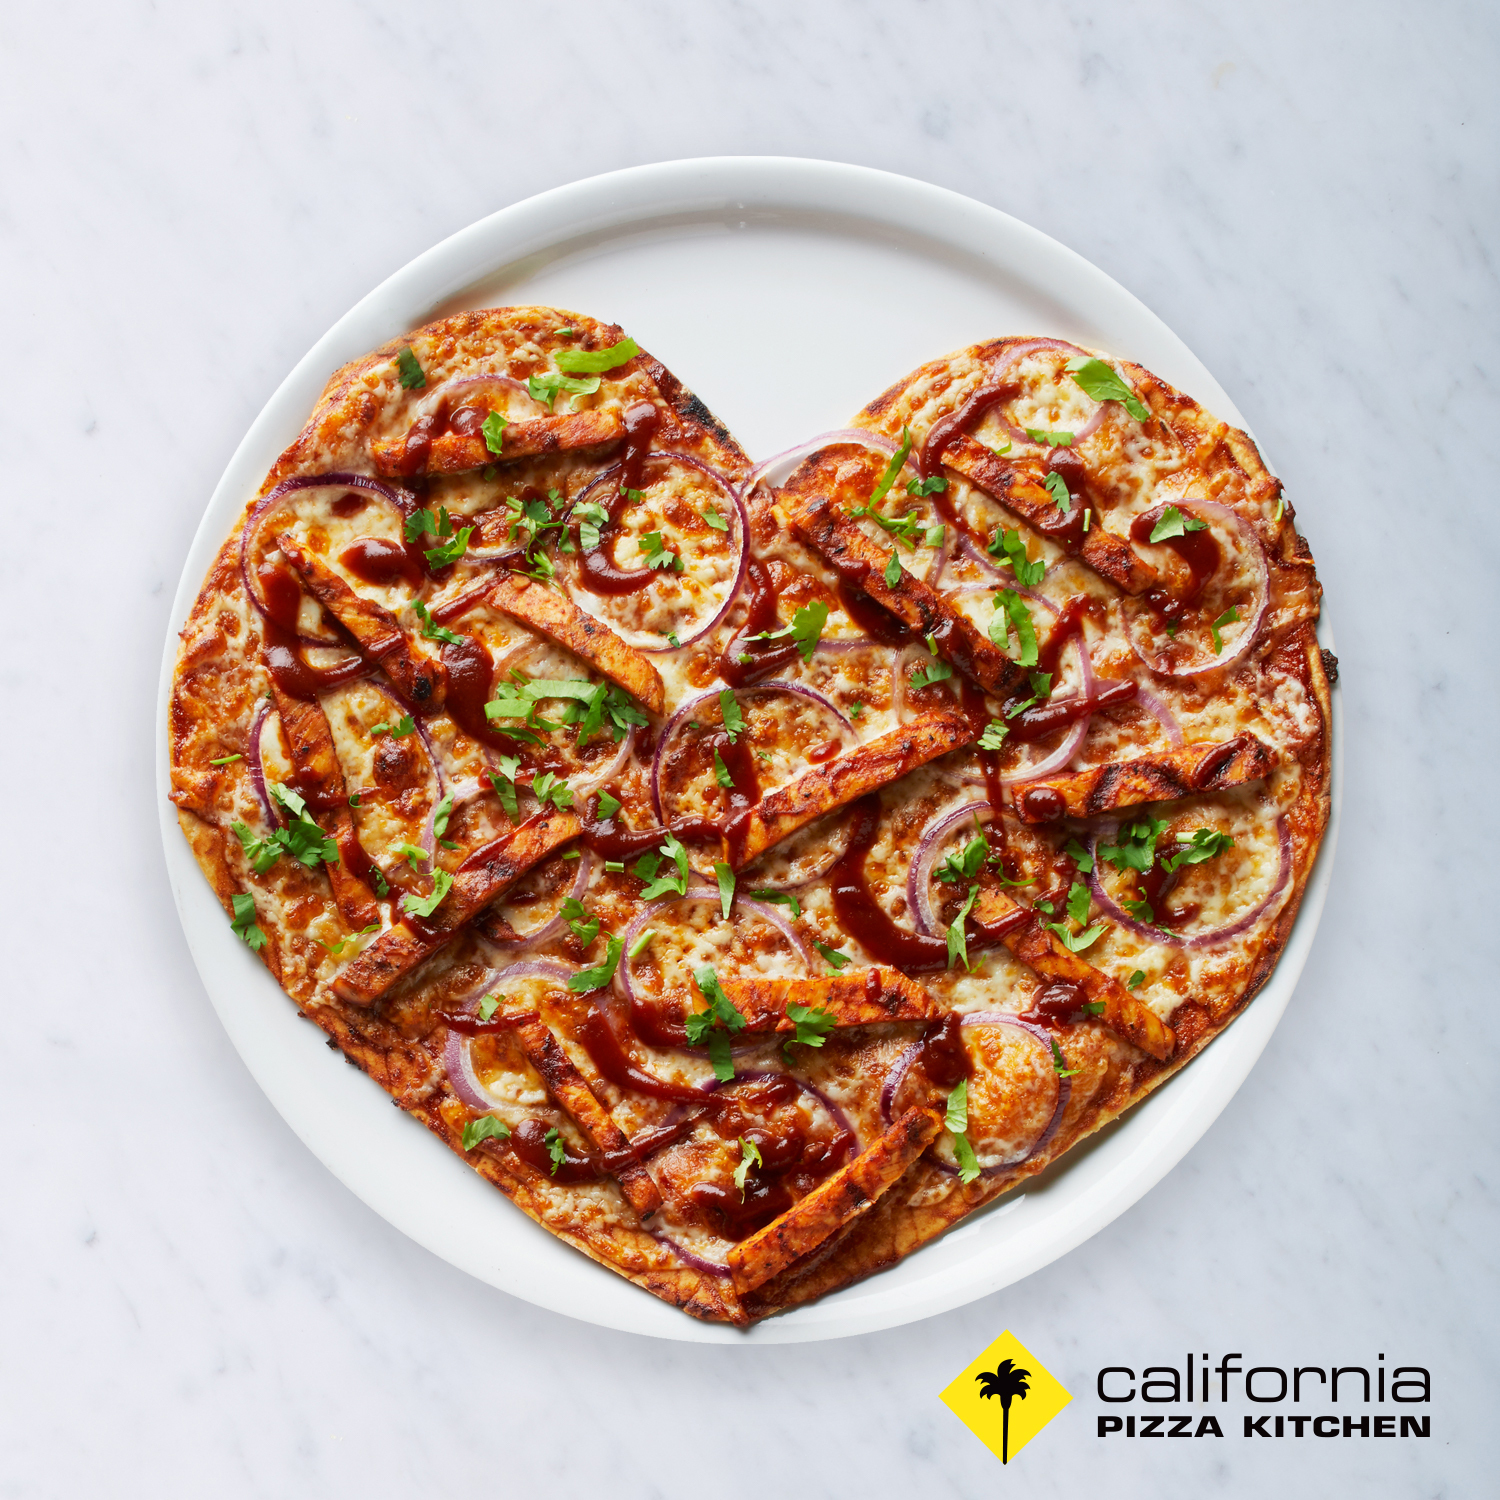 California Pizza Kitchen Dishes Out The Love This Valentines Day With Heart Shaped Pizzas